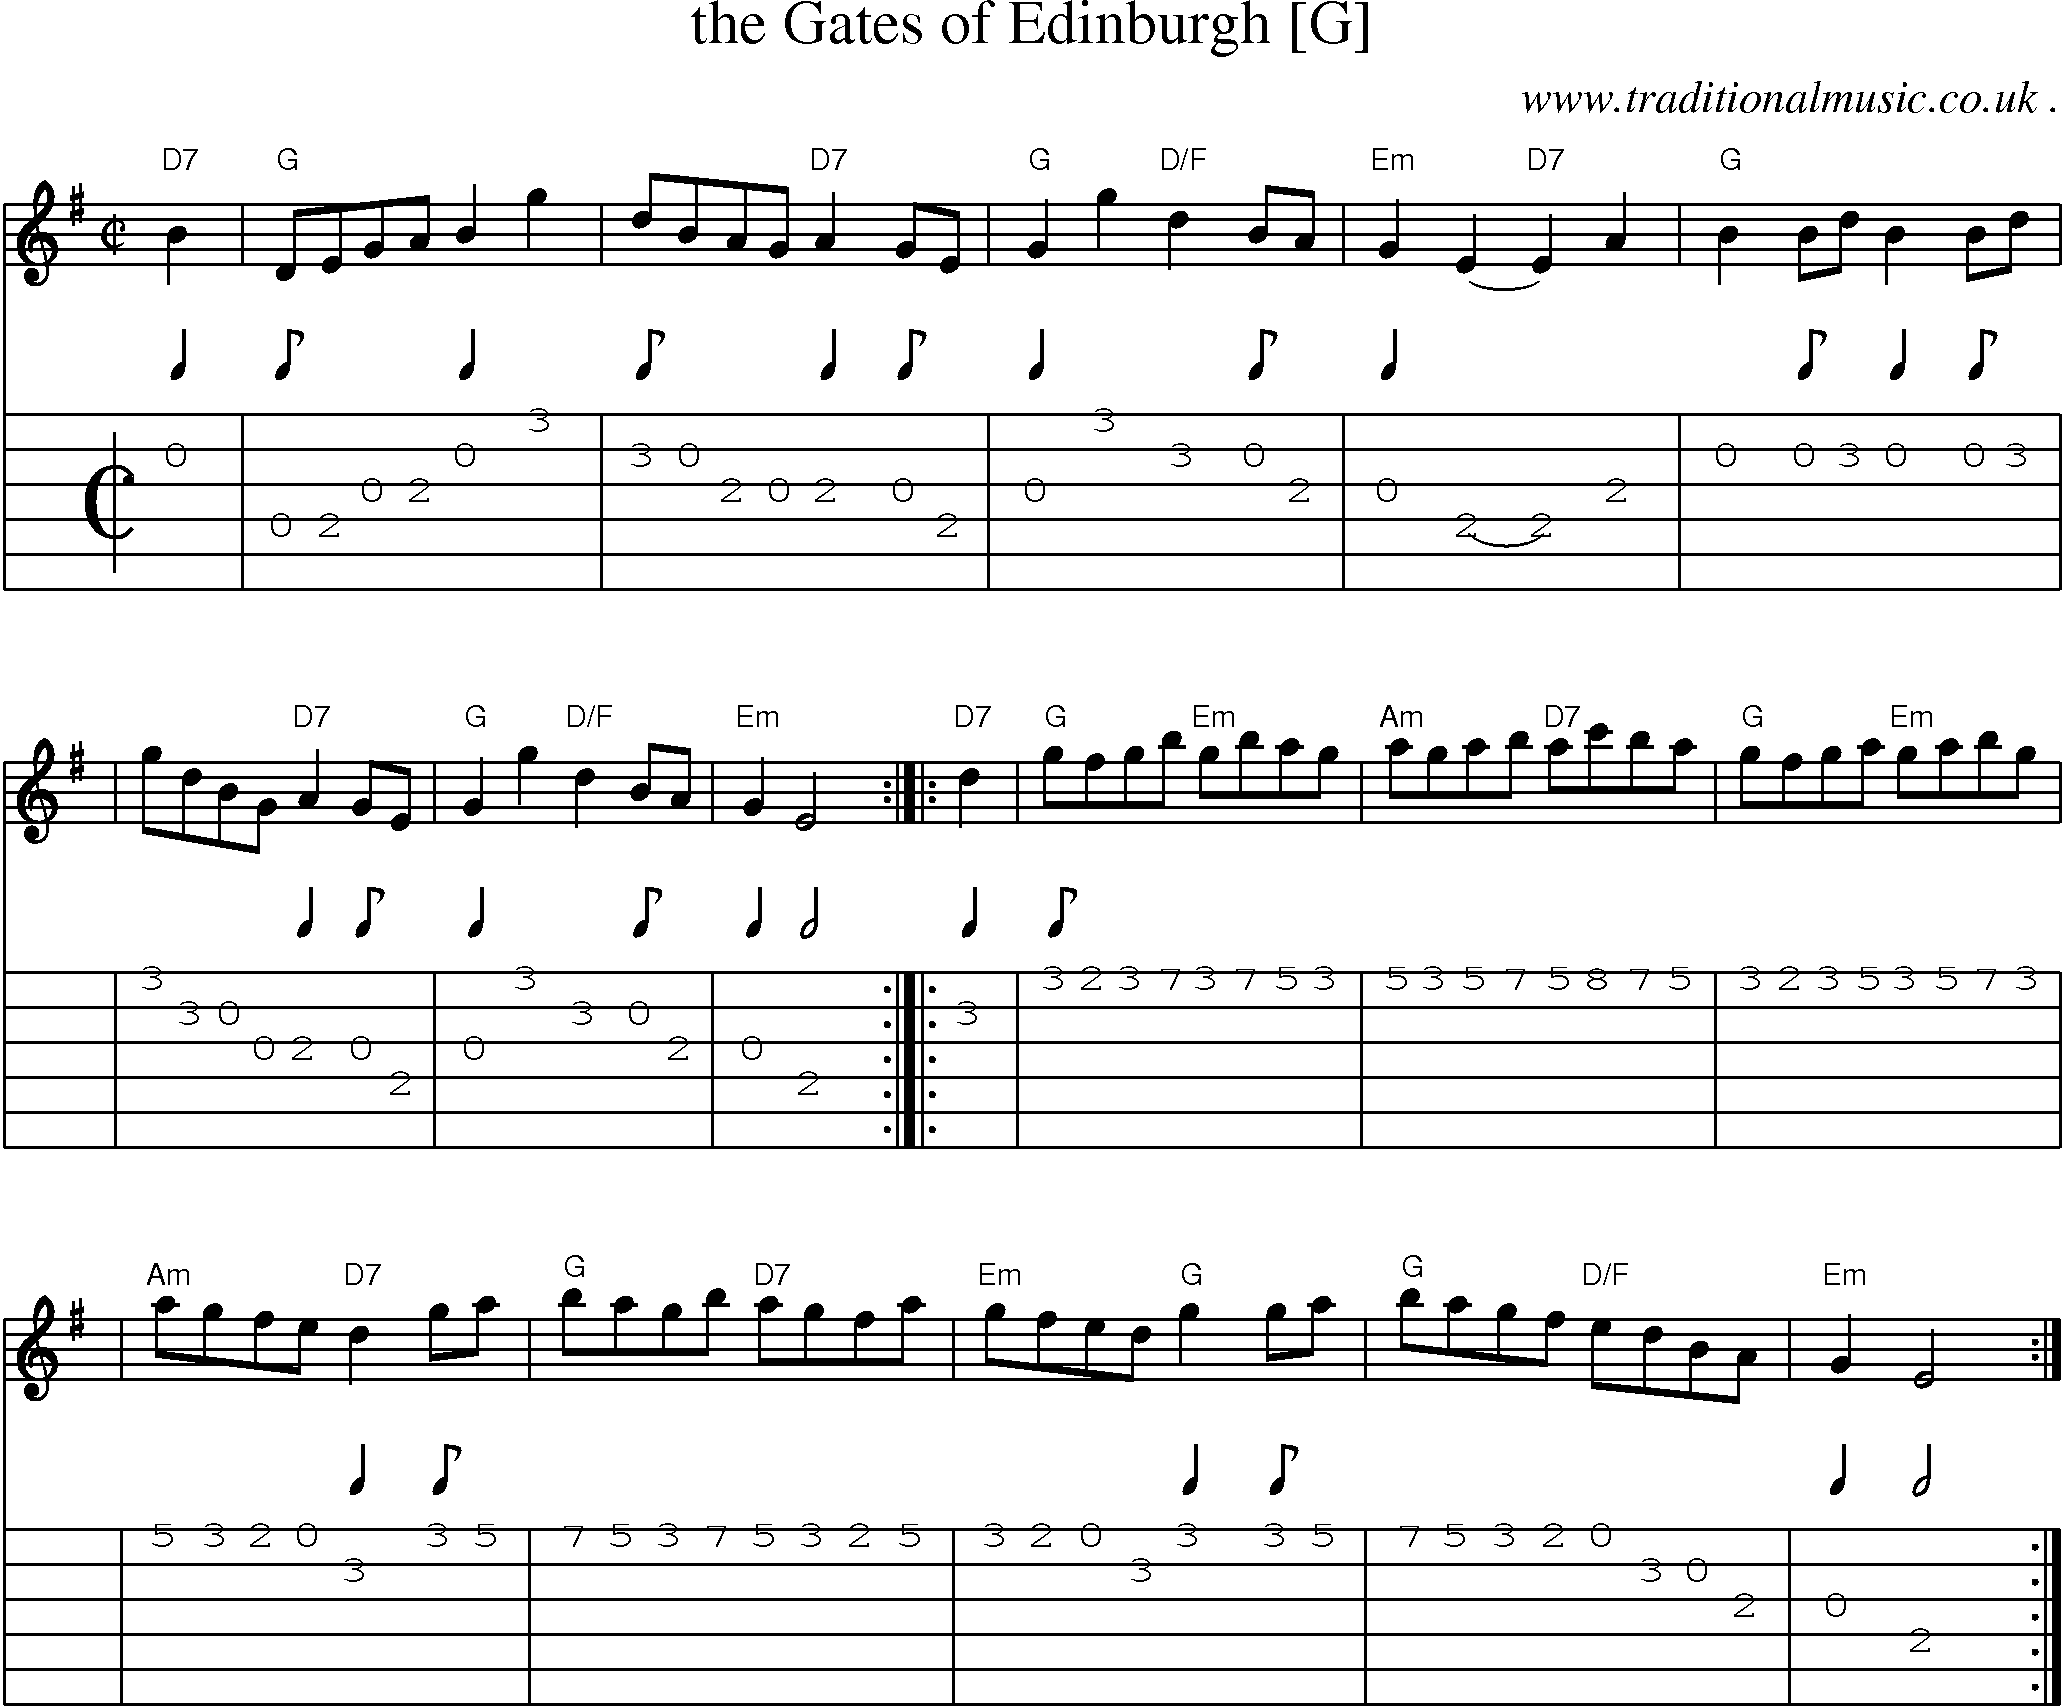 Sheet-music  score, Chords and Guitar Tabs for The Gates Of Edinburgh [g]